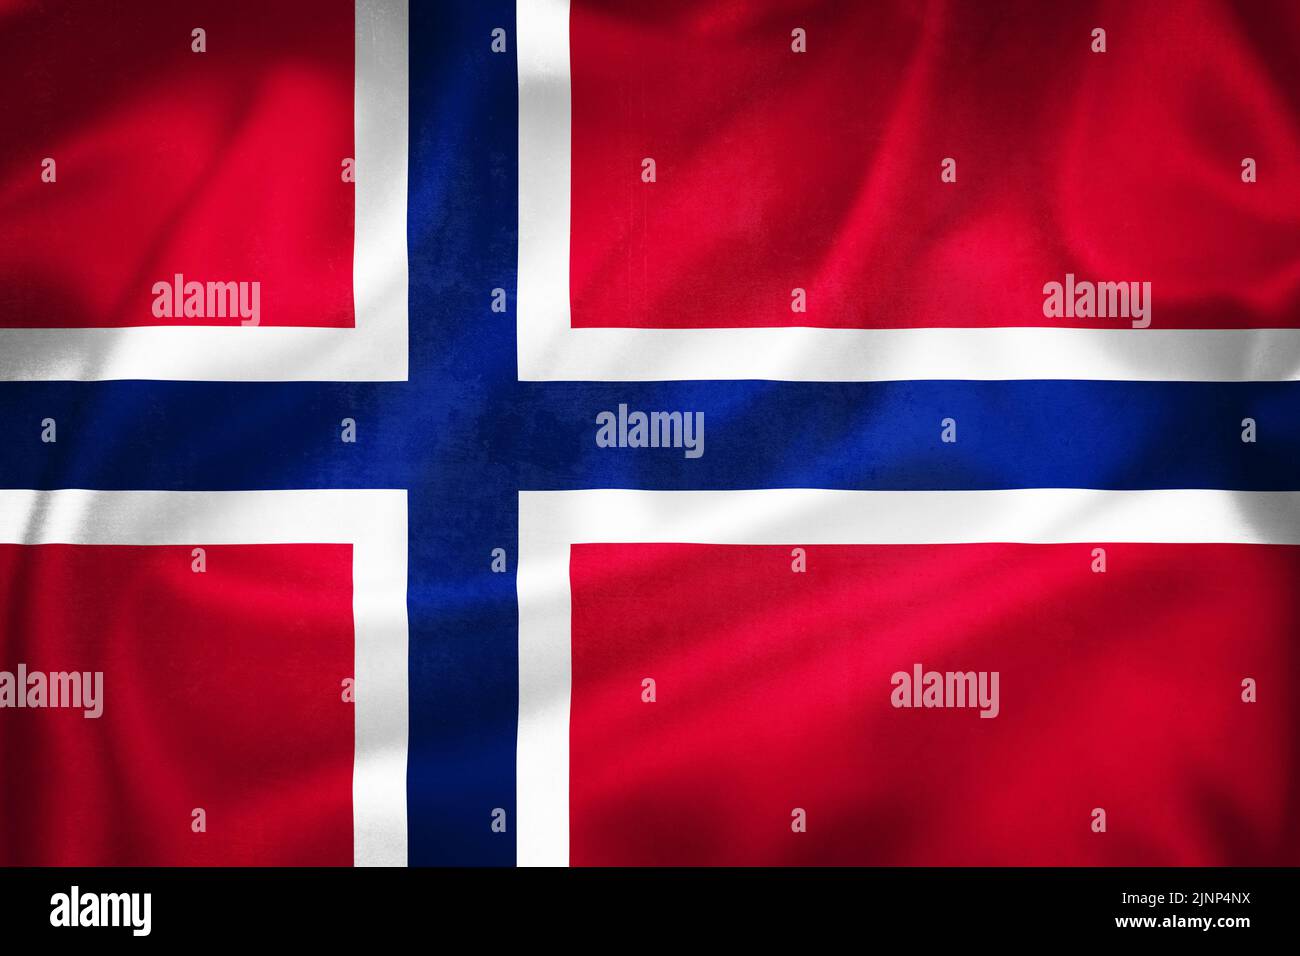 Grunge 3D illustration of Norway flag, concept of Norway Stock Photo